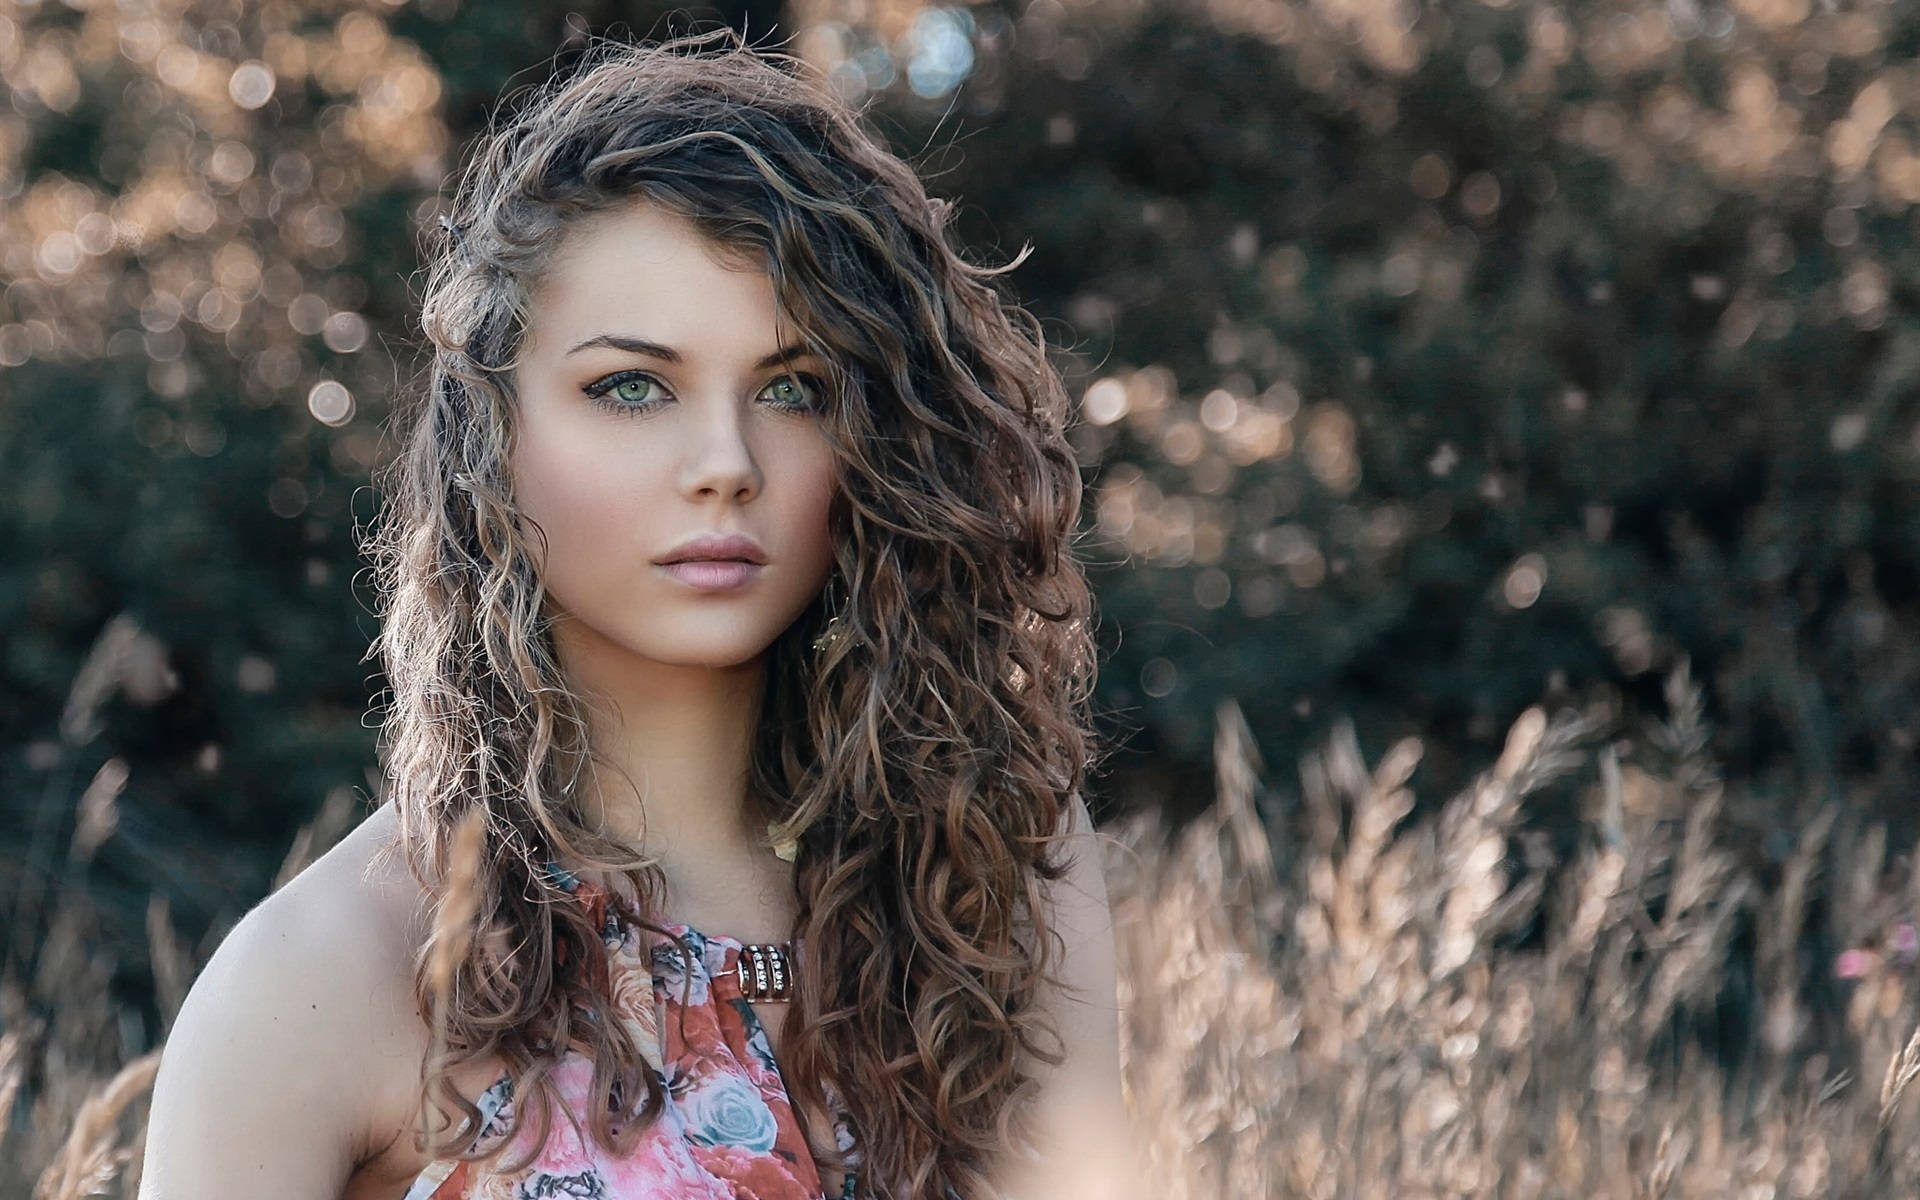 Captivating Woman With Curly Hair Wallpaper